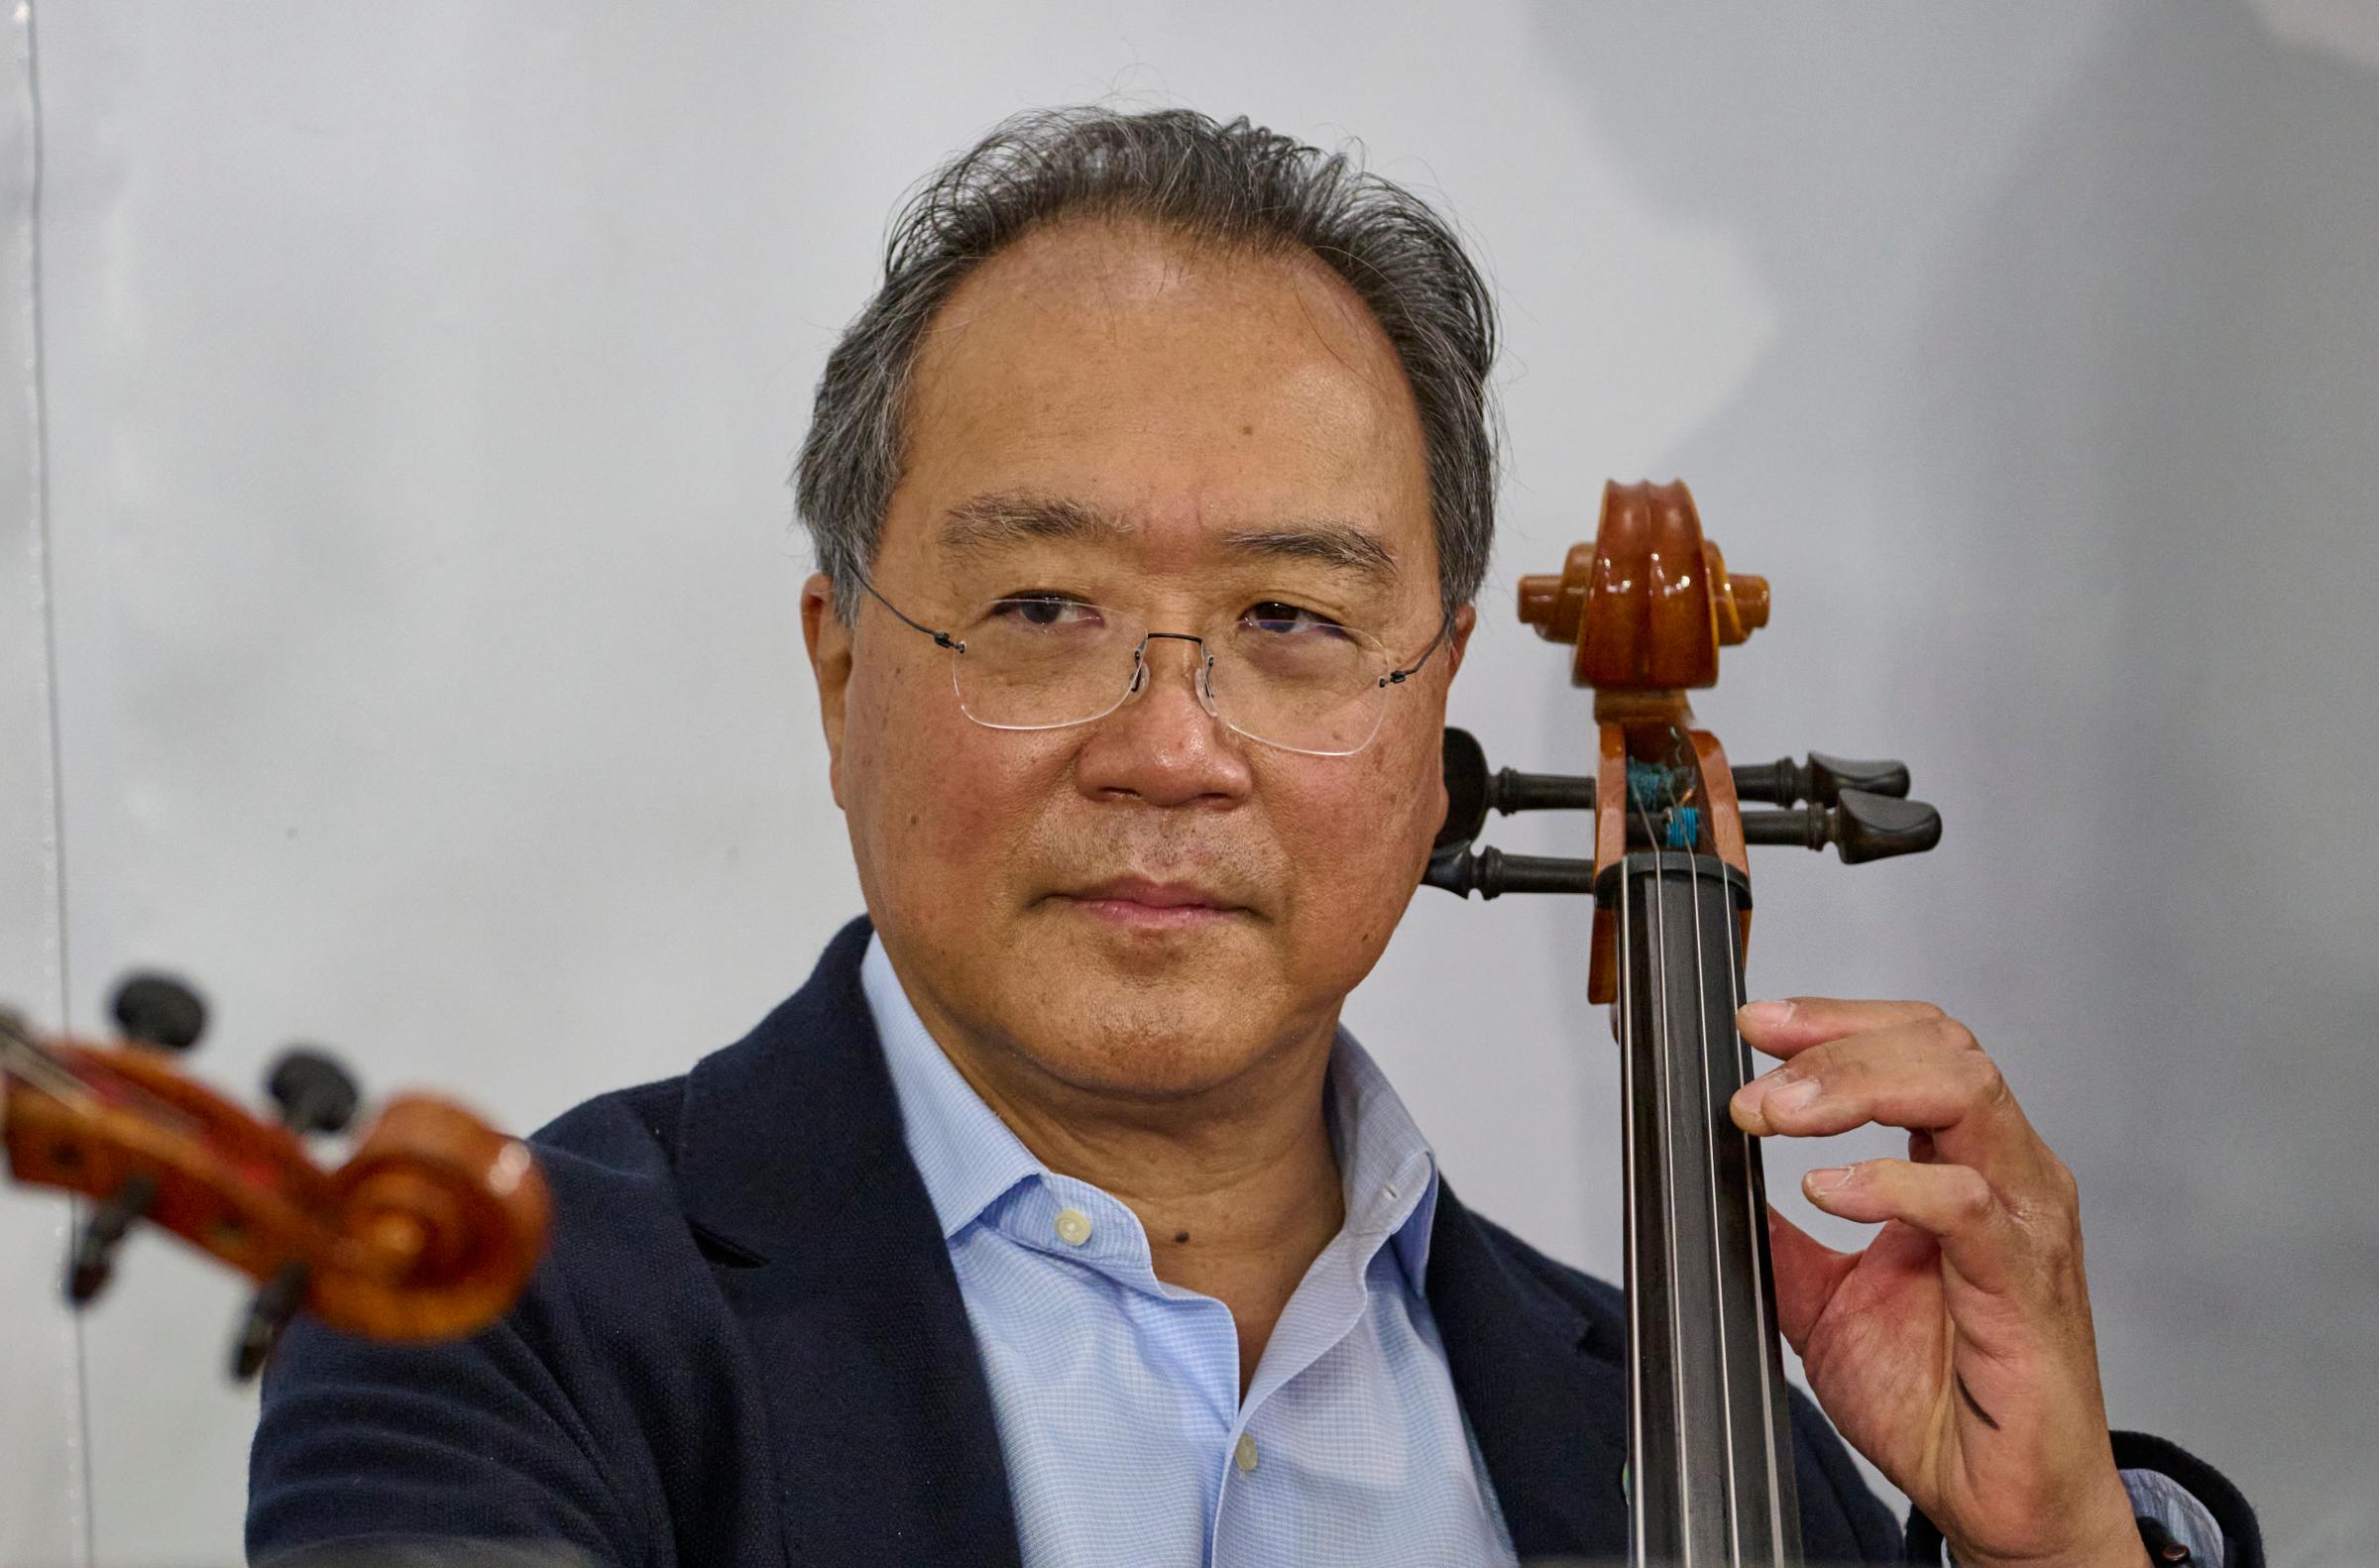 US Cellist Yo-Yo Ma On "The Importance Of Music For The Union Of Peoples" Event In Lisbon